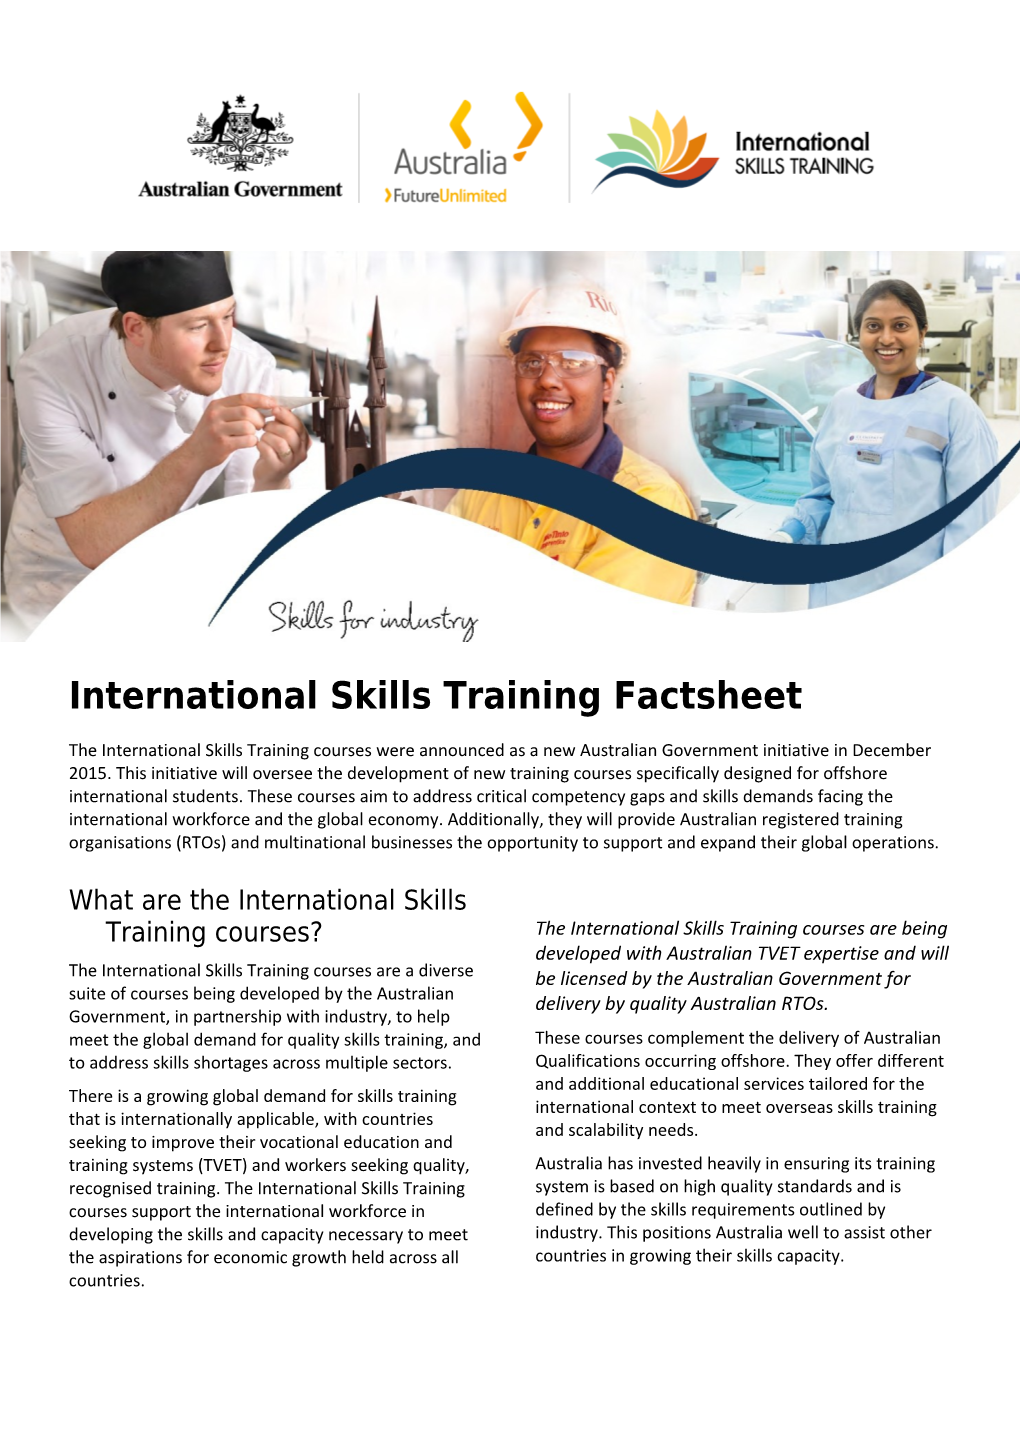 What Are the International Skills Training Courses?